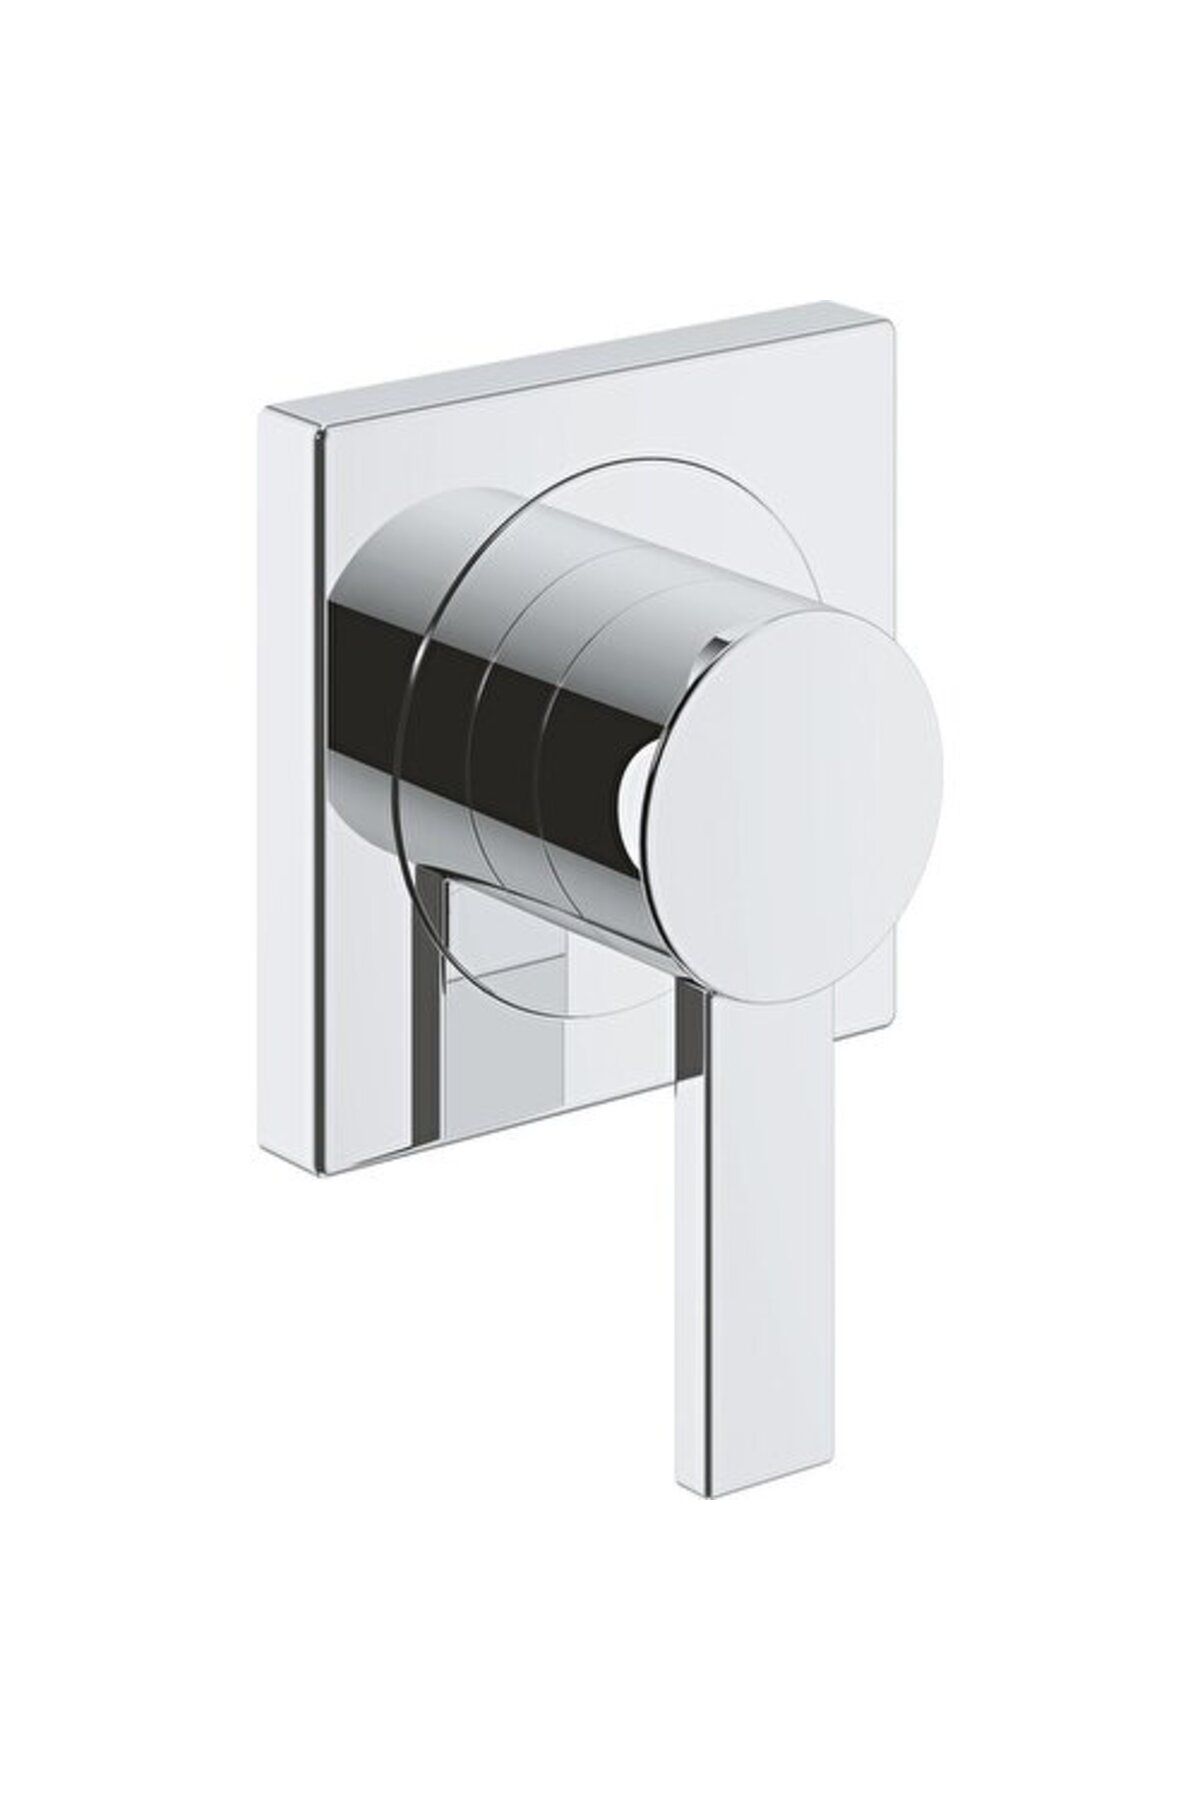 Grohe Allure Ankastre Stop Valf